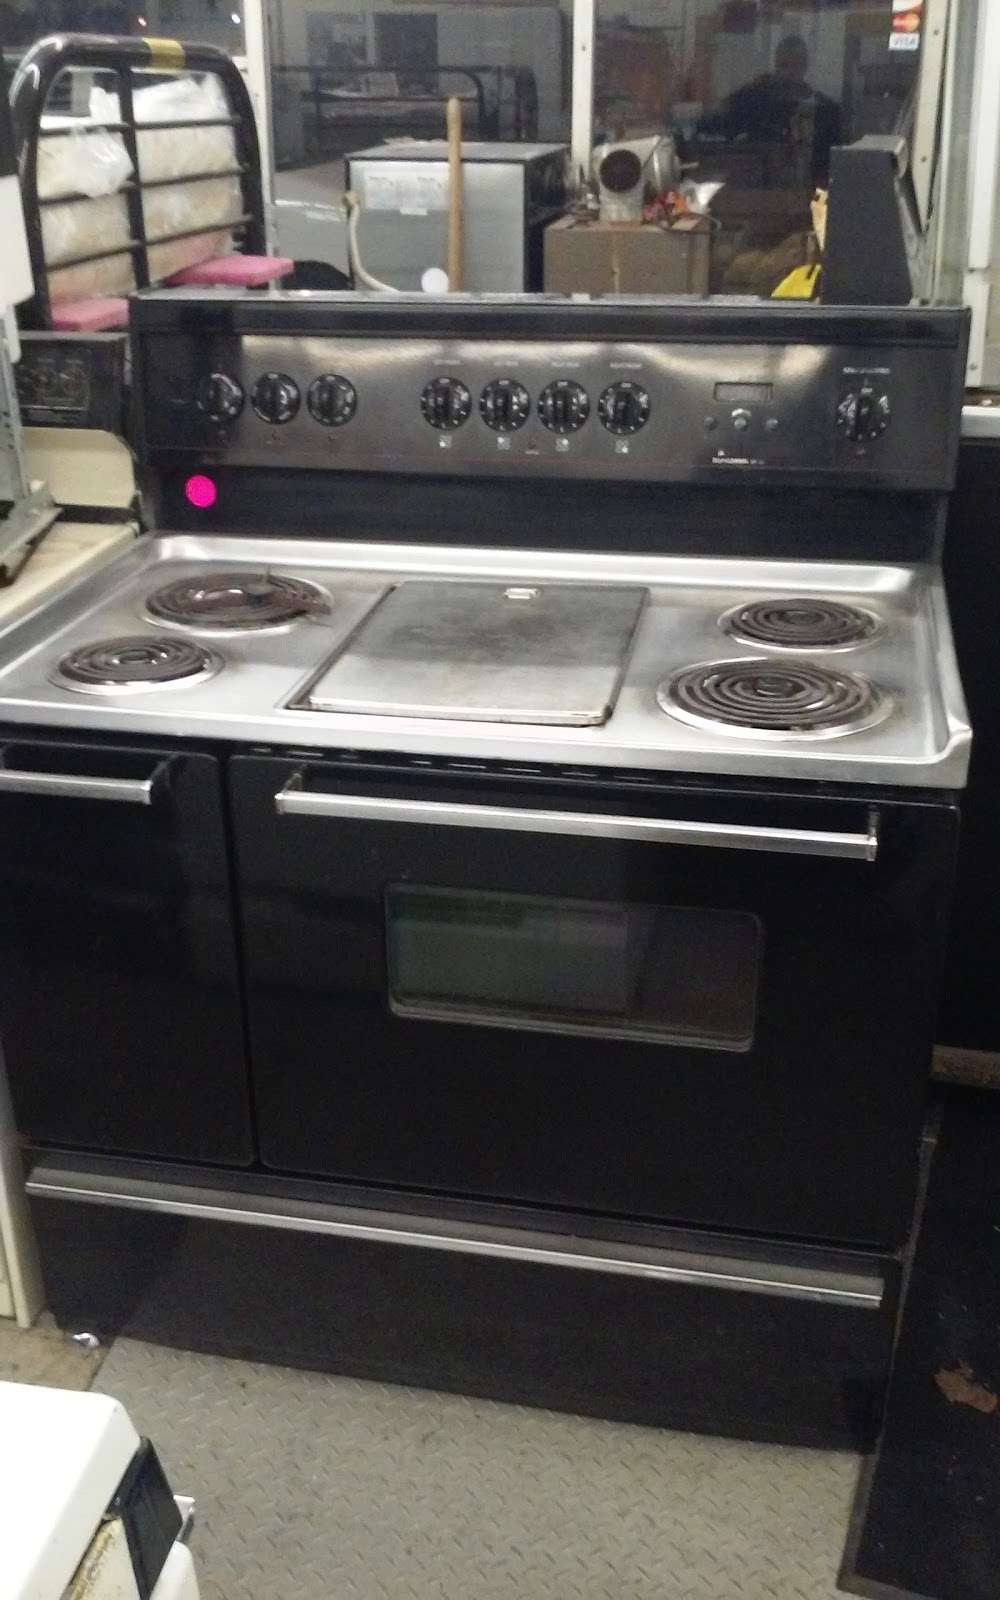 Maywood Appliance - home goods store  | Photo 3 of 9 | Address: 2 N 5th Ave, Maywood, IL 60153, USA | Phone: (708) 681-2222